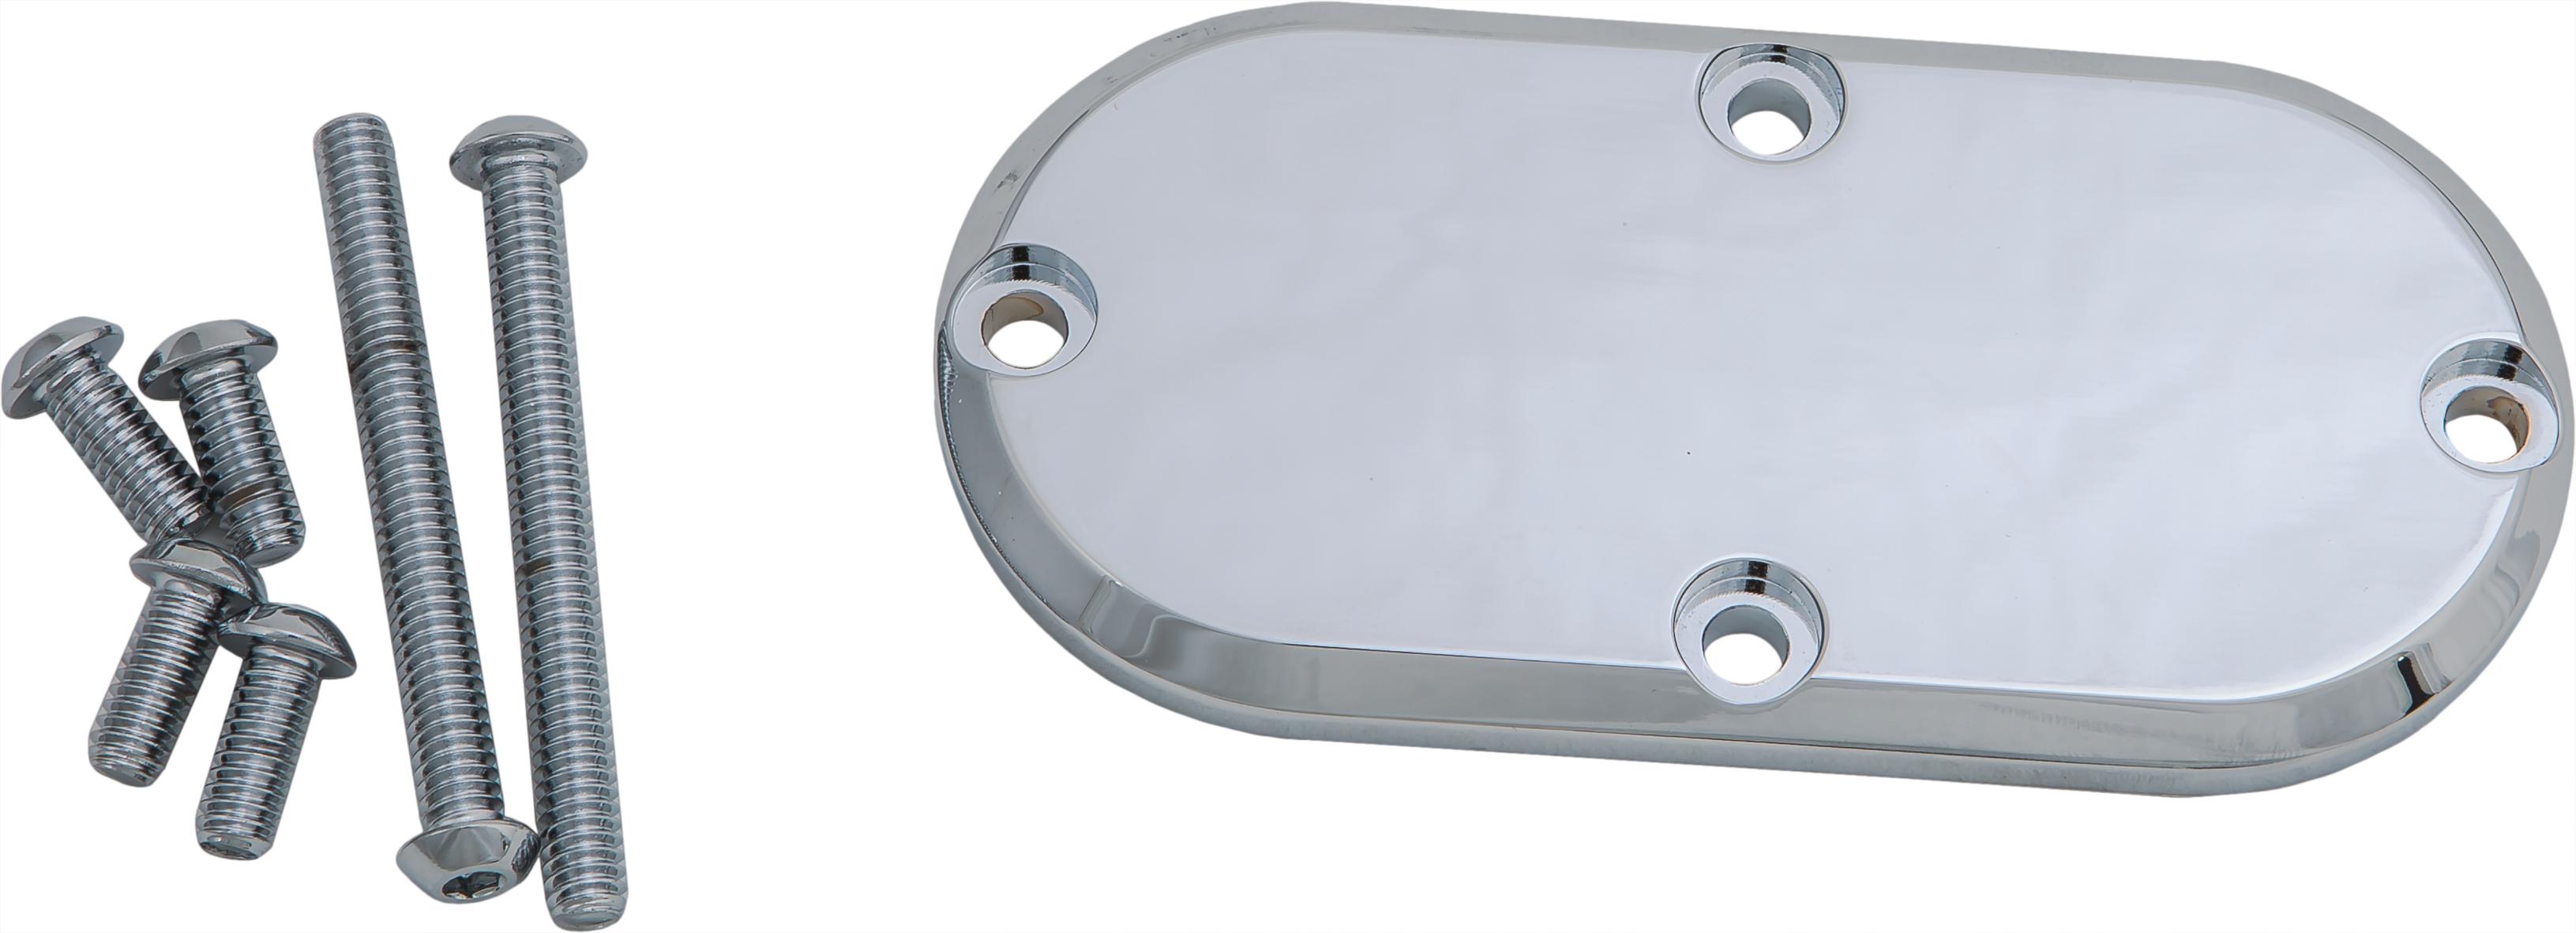 Pro One - Inspection Cover Smooth Chrome - 202140